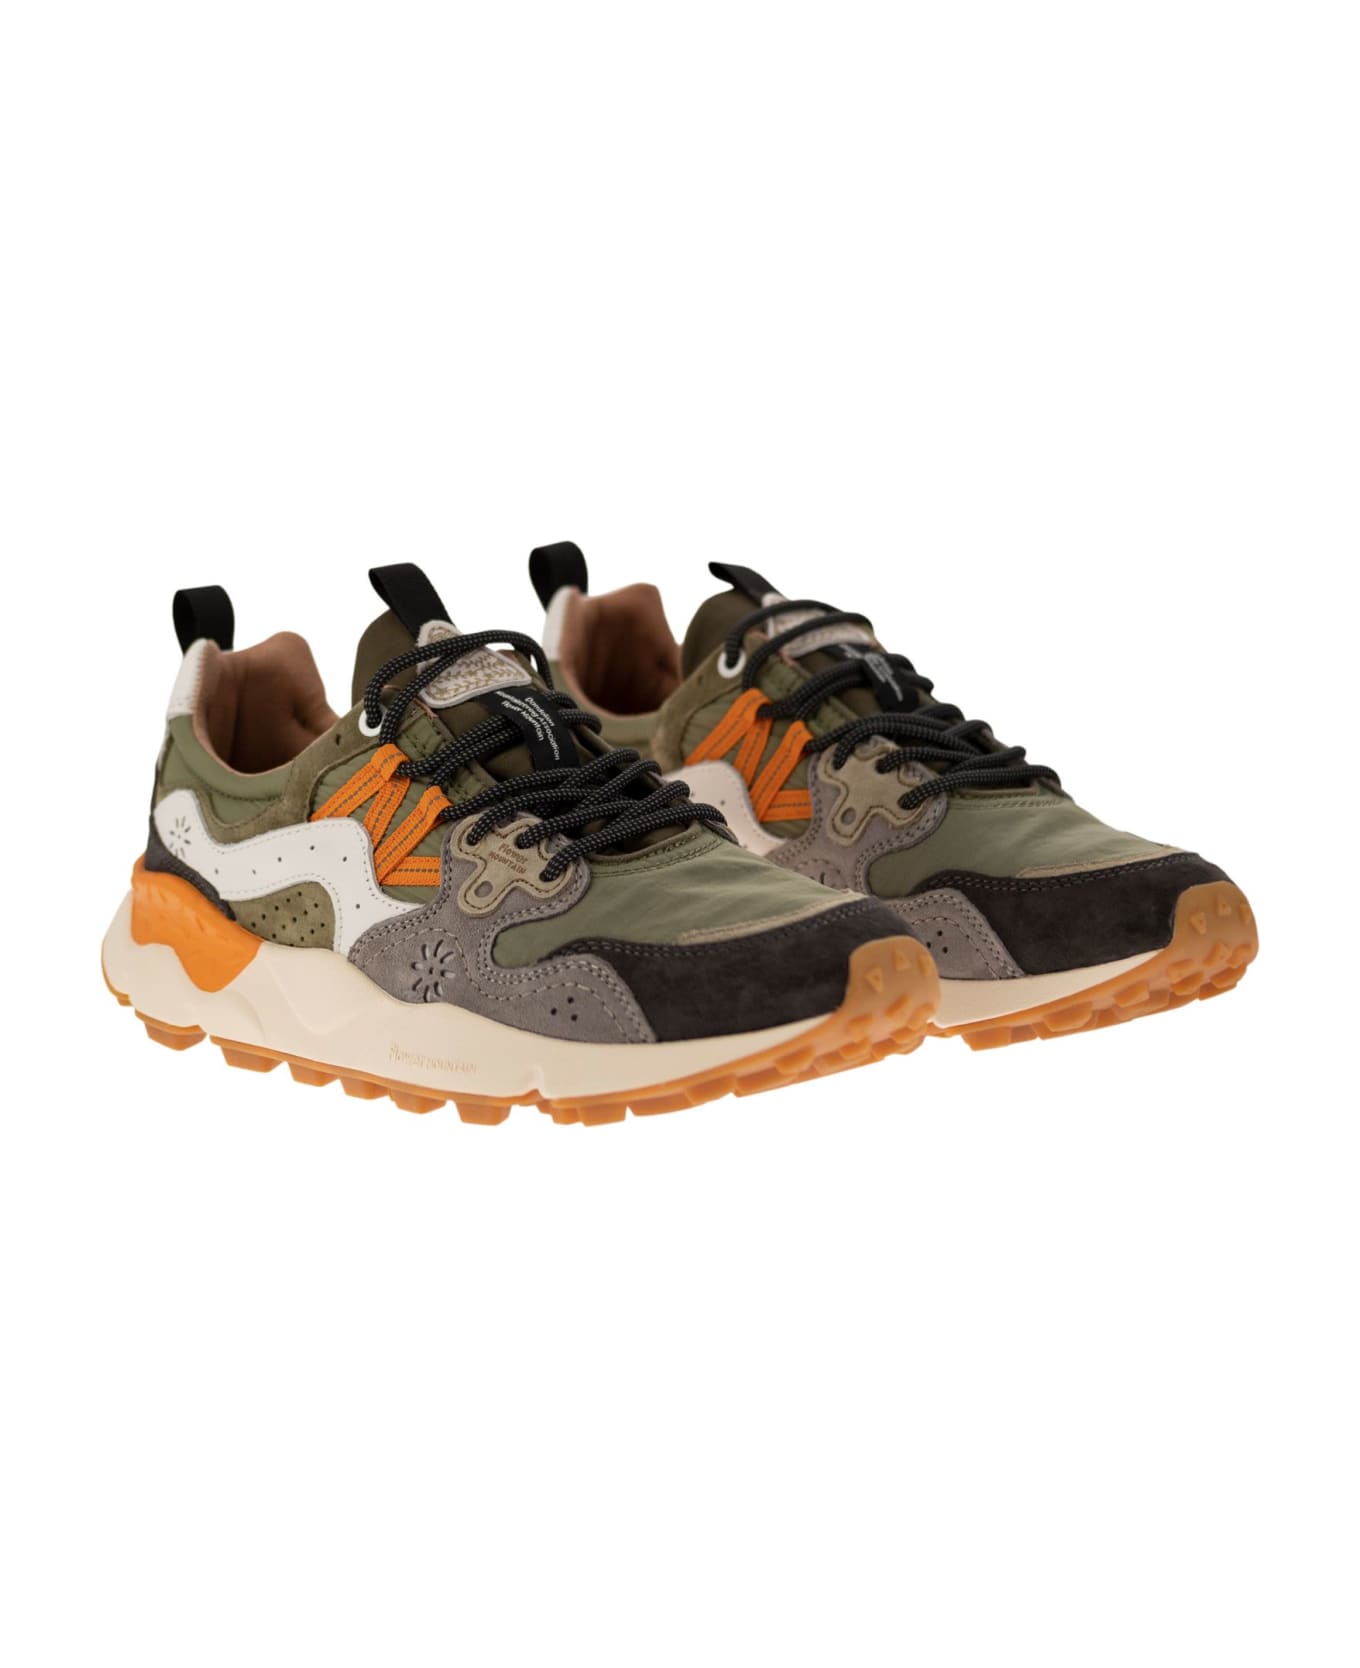 Flower Mountain Yamano 3 - Sneakers In Suede And Technical Fabric - Anthracite